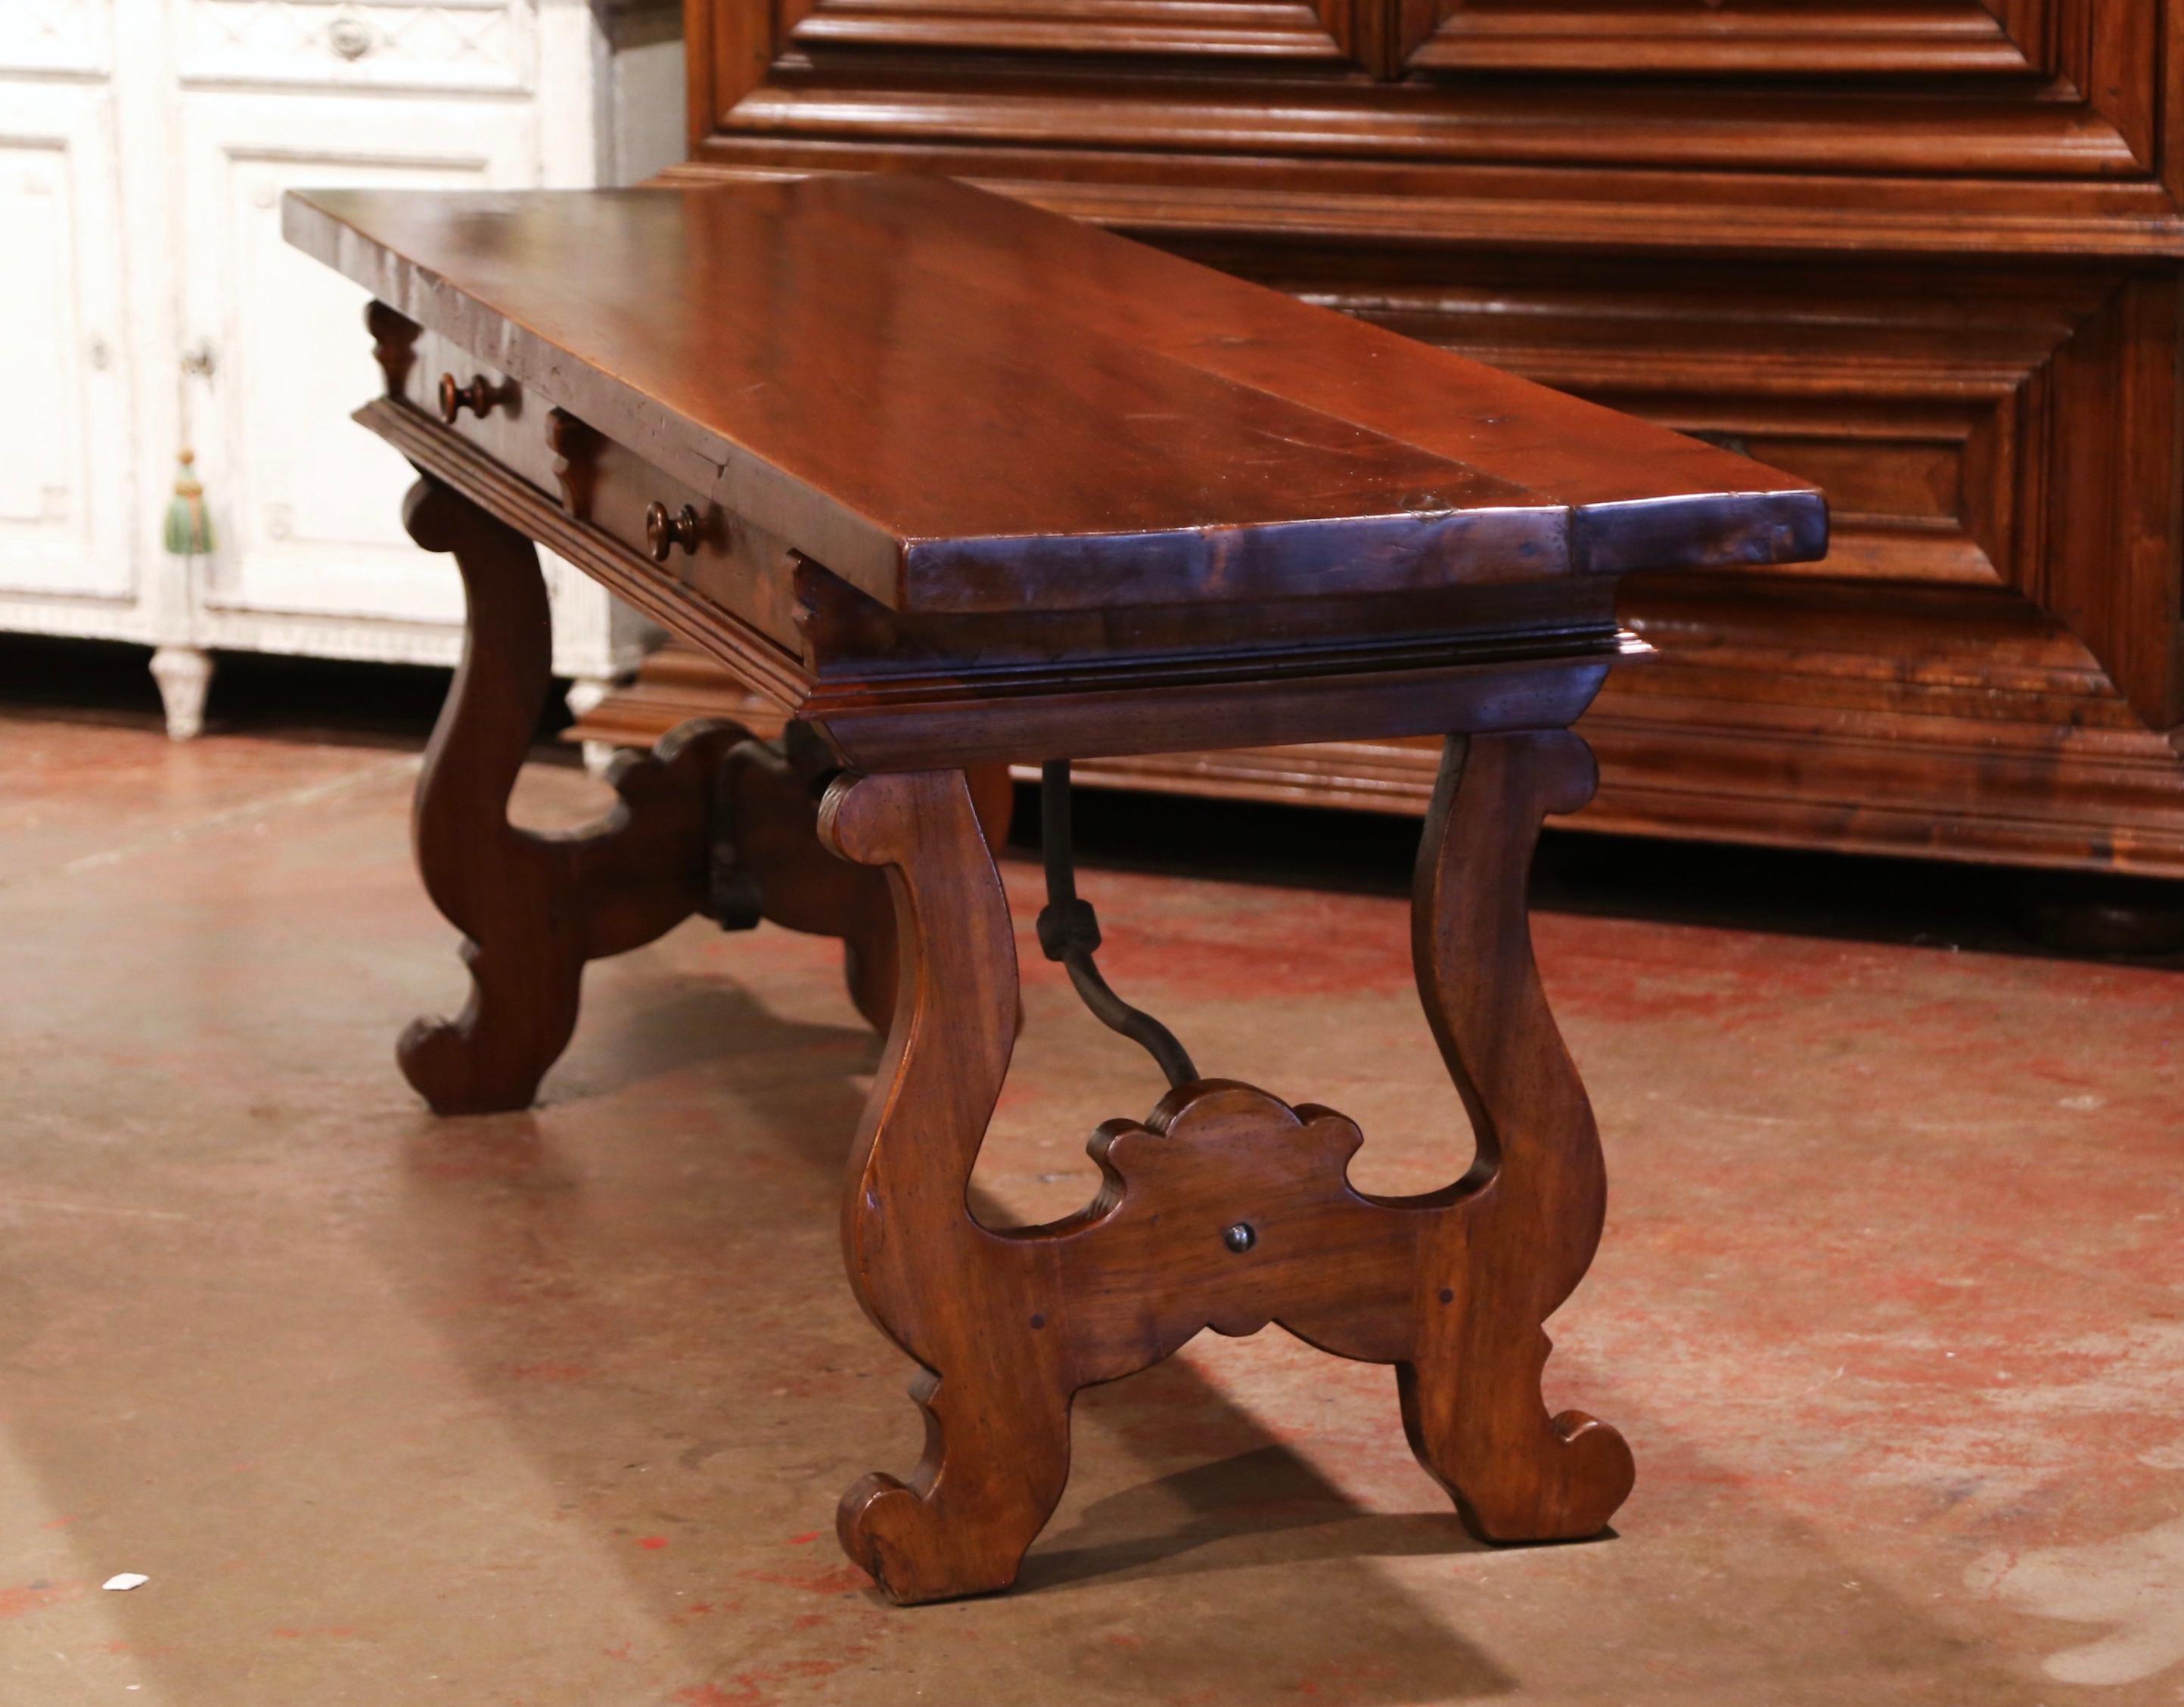 Wrought Iron Mid-19th Century Spanish Carved Walnut and Iron Console Table Desk with Drawers